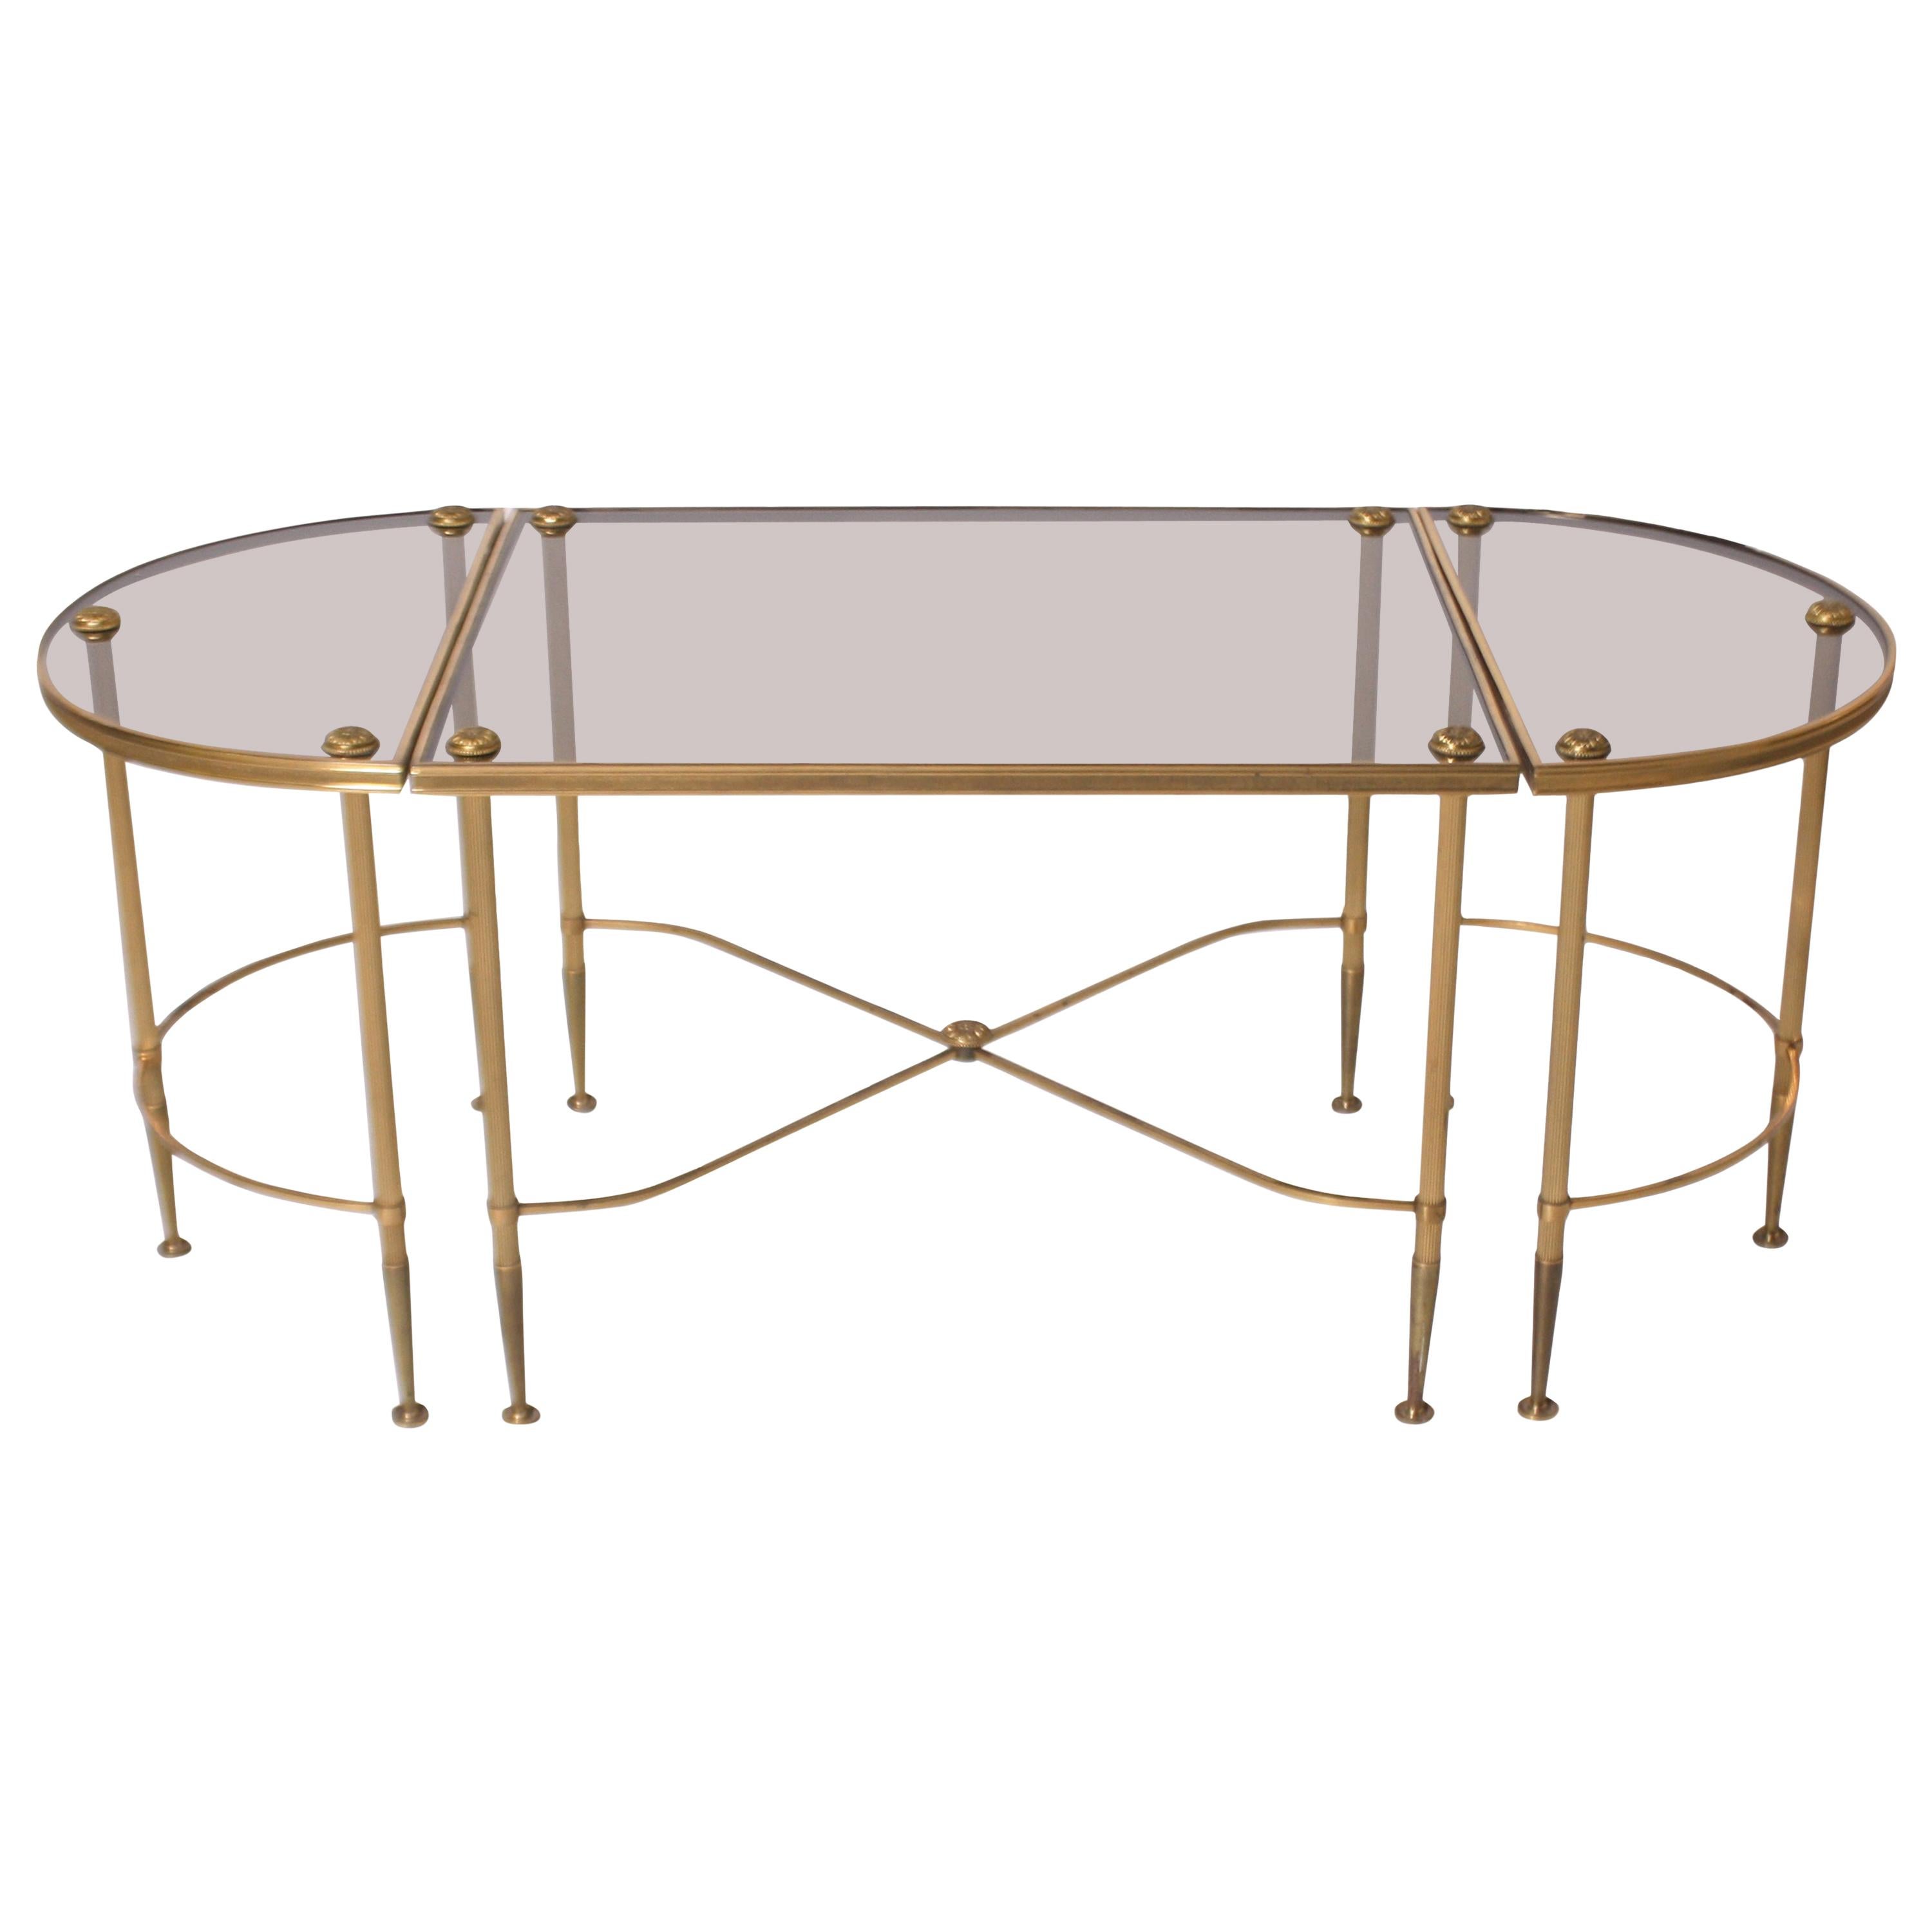 Three-Piece Brass and Glass Bagues Coffee Table, circa 1950